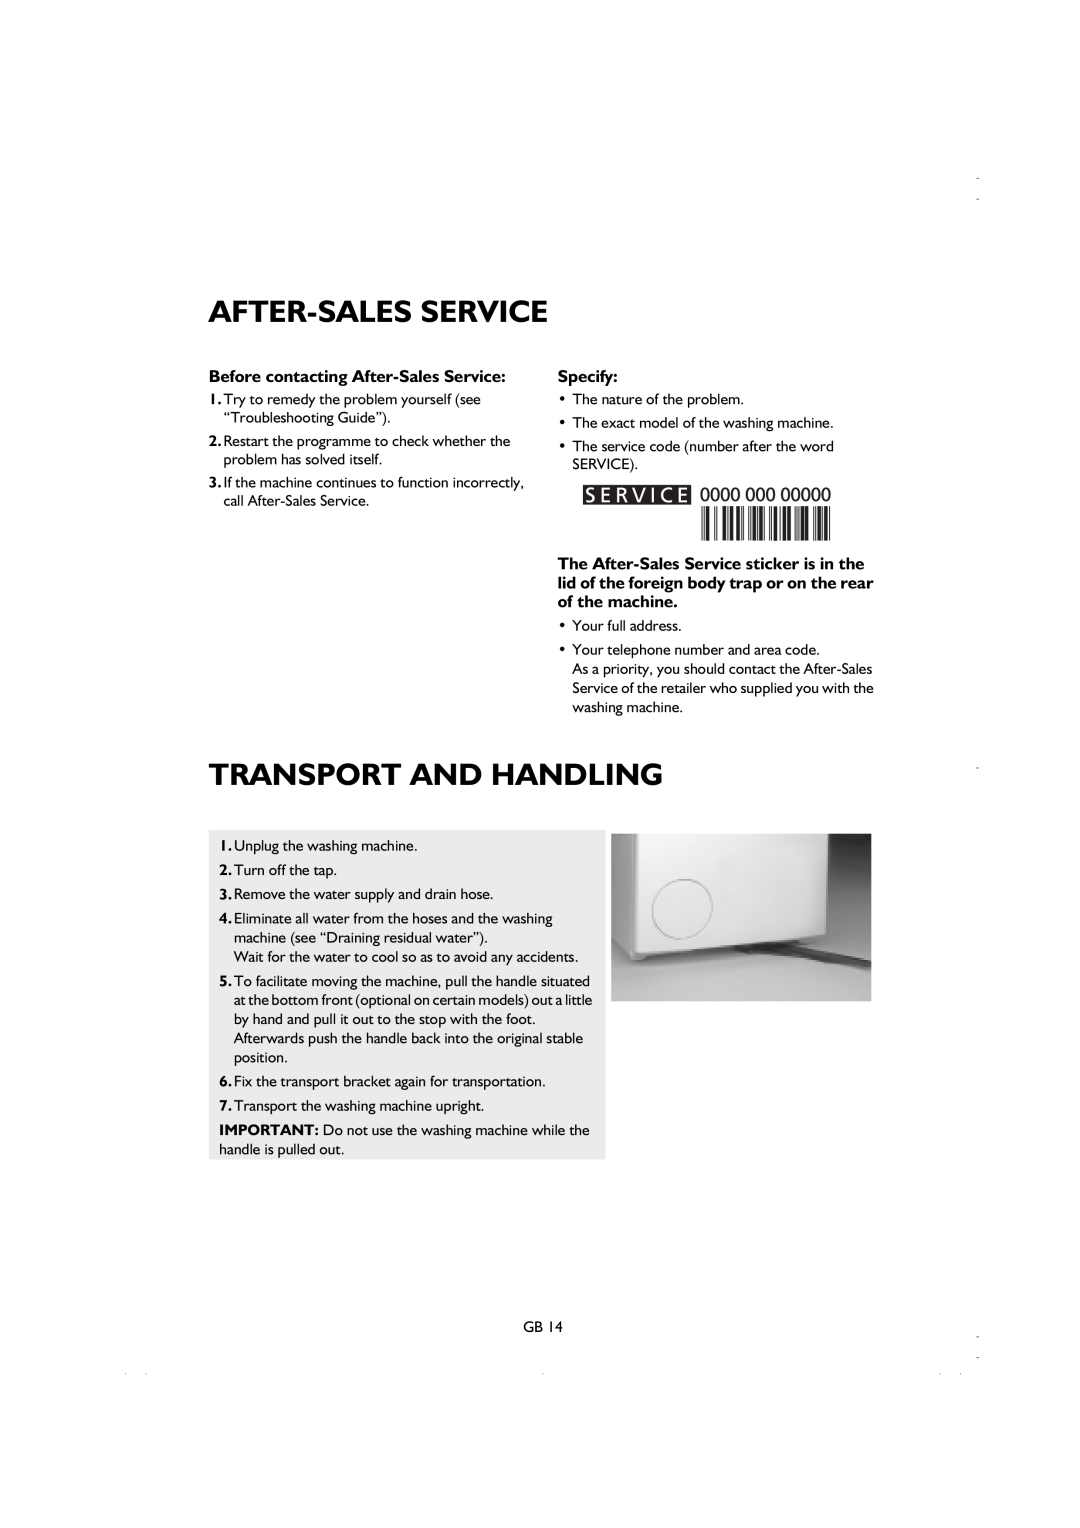 Smeg K600TL1 manual Transport And Handling, Before contacting After-Sales Service, Specify 